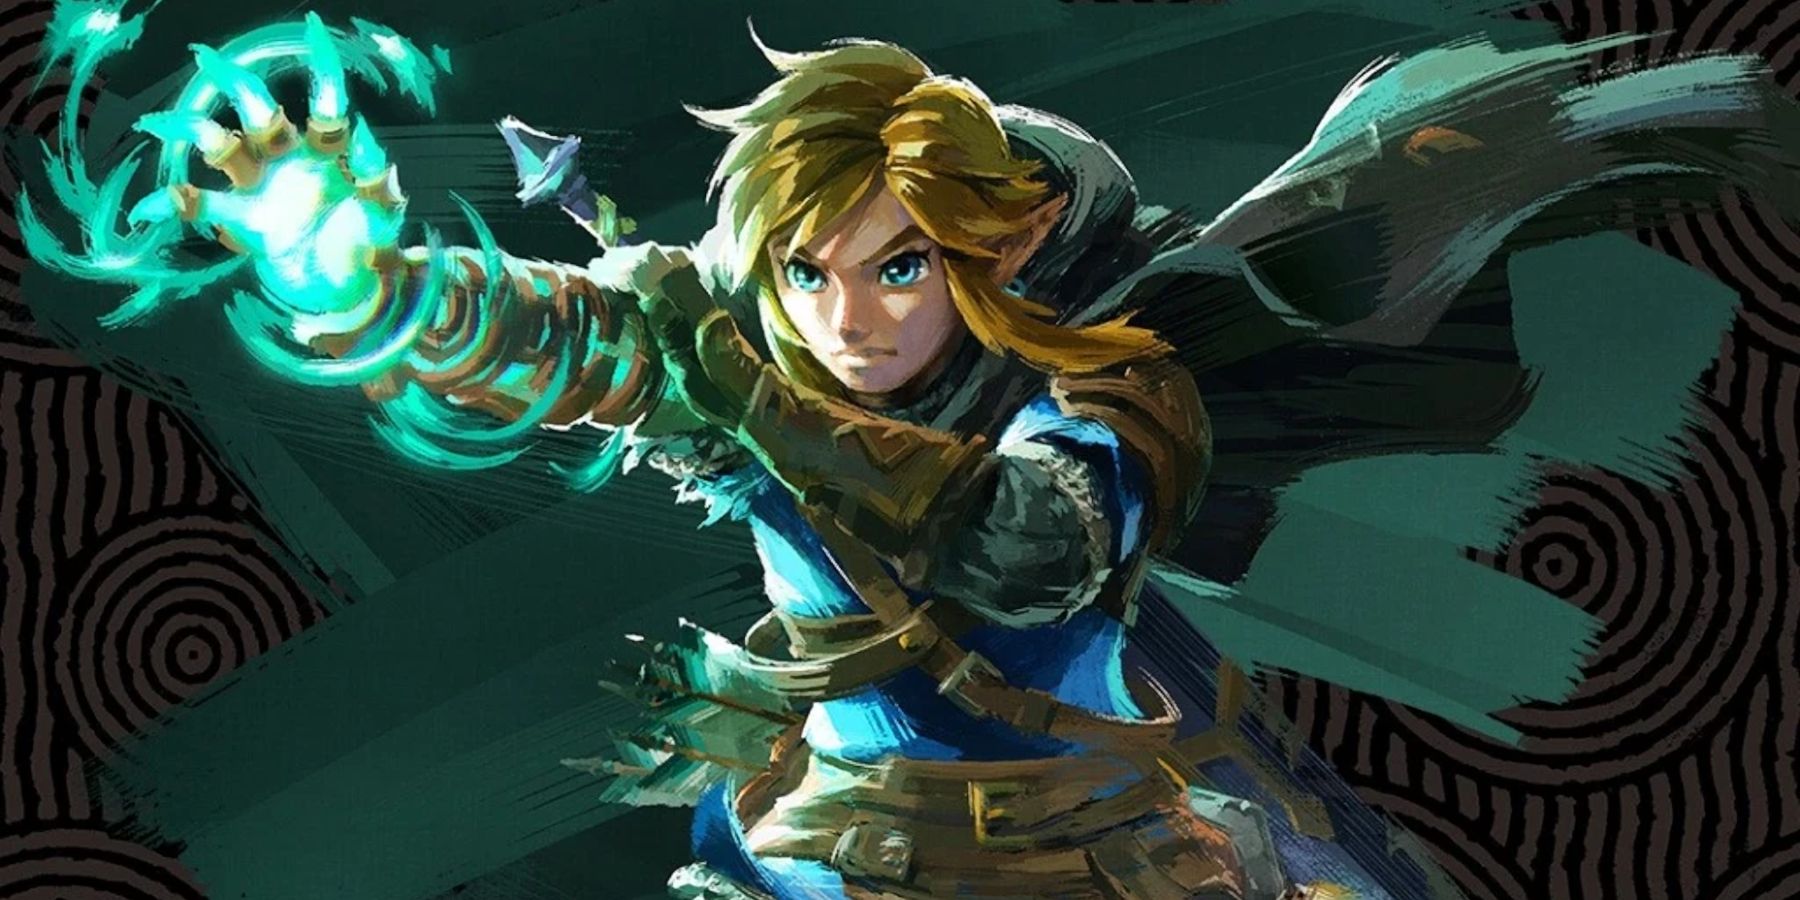 link with his new arm and hand